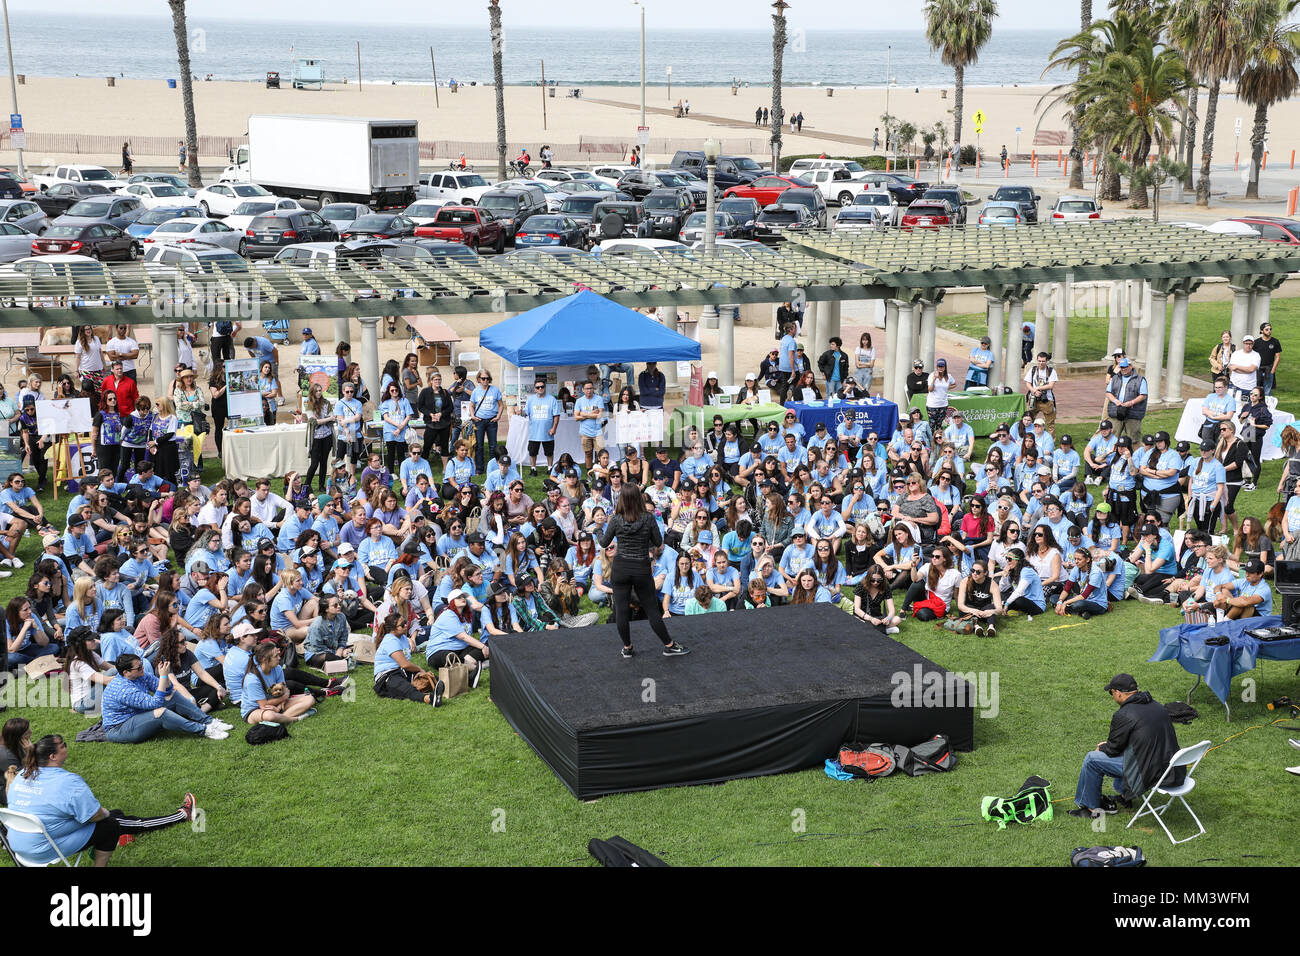 The National Eating Disorders Association (NEDA) Walk was held in Los  Angeles at Crescent Bay Point Park in Santa Monica, California. NEDA is the  largest nonprofit organization dedicated to supporting individuals and